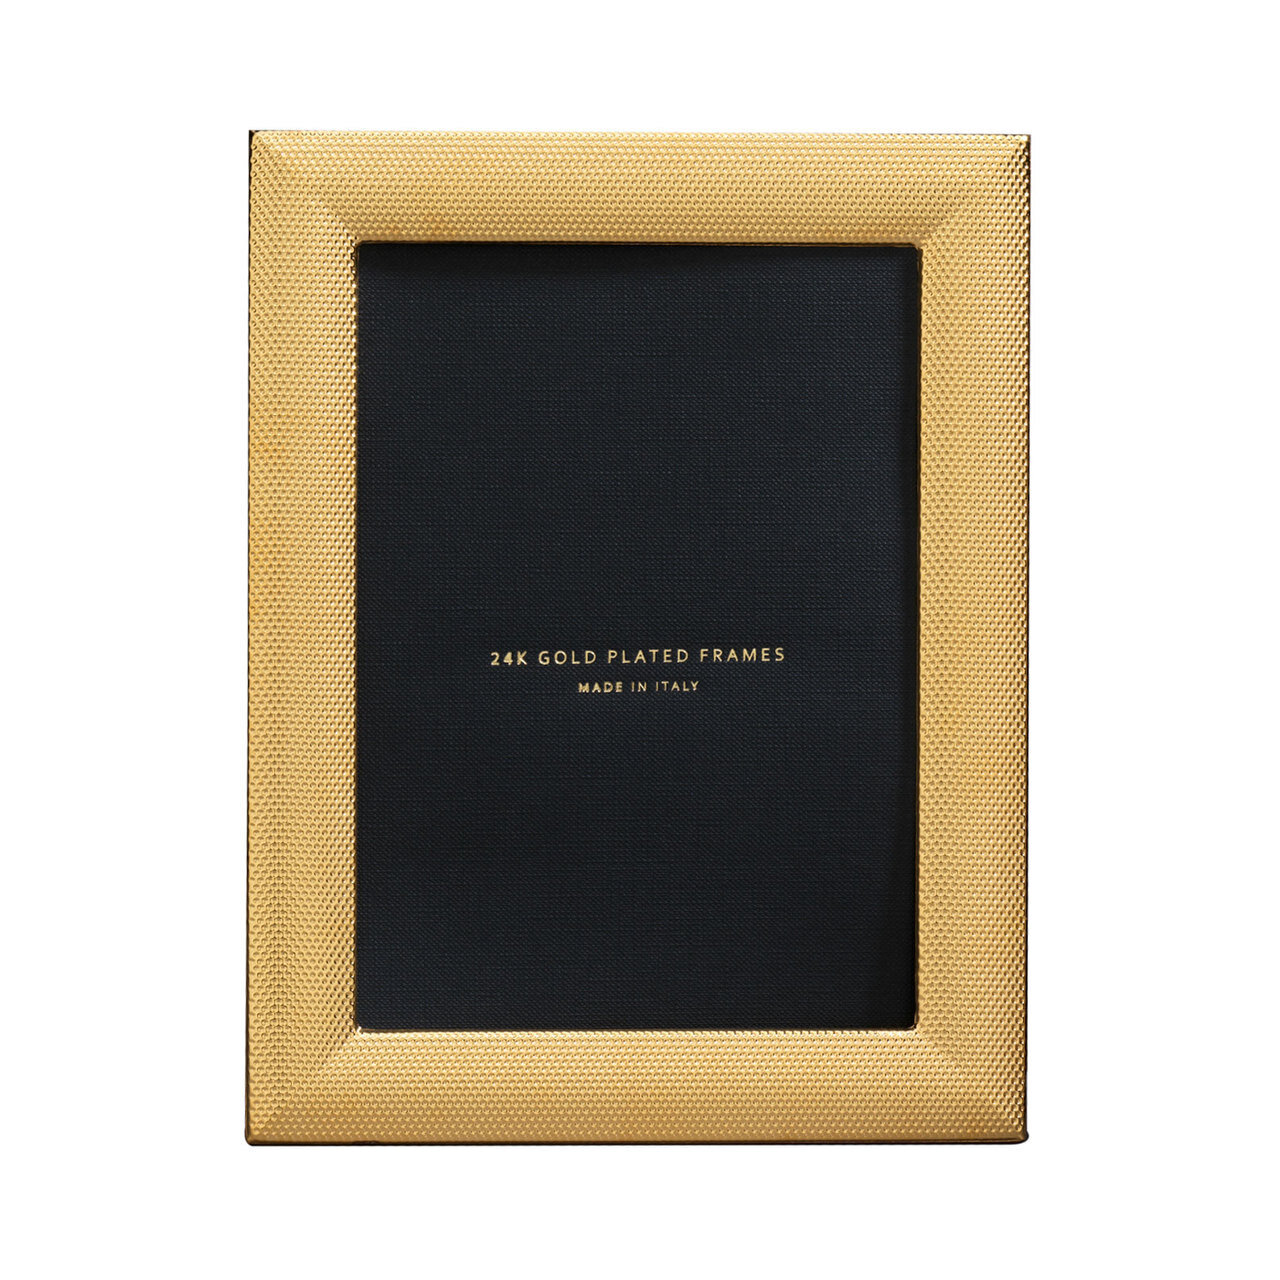 Cunill Cleo 8 x 10 Inch Picture Frame - 24k Gold Plated 0.5 Microns